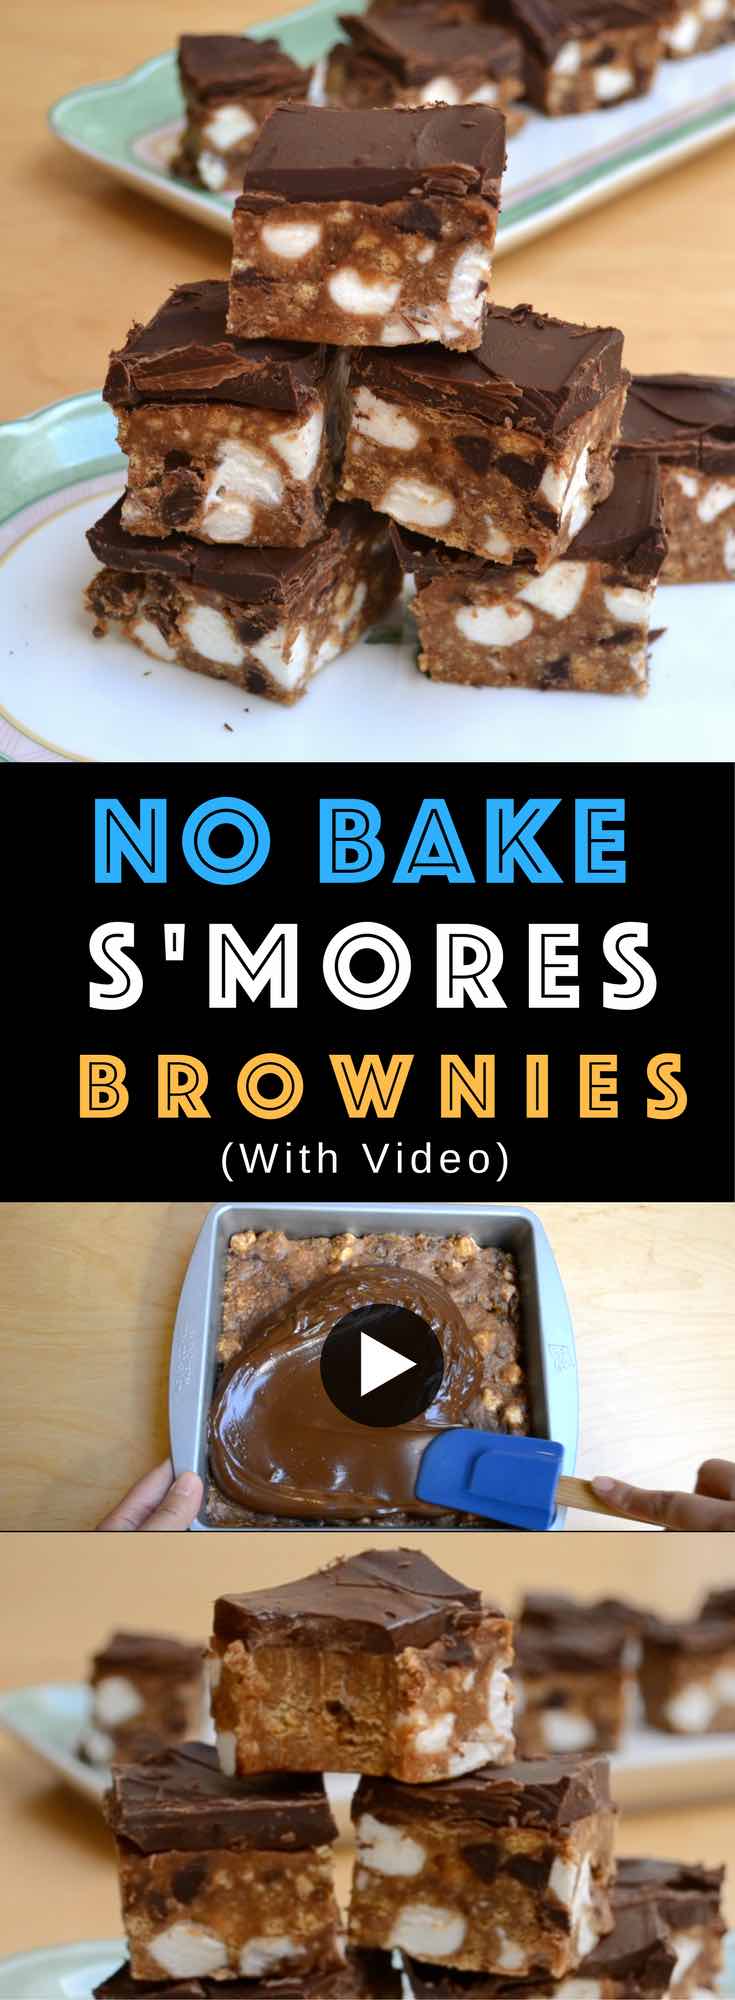 S'mores Brownies made with peanut butter for an easy no-bake recipe loaded with mouthwatering s'more flavors. Make them for takealong snacks, parties, potlucks or picnics! #smoresbrownies